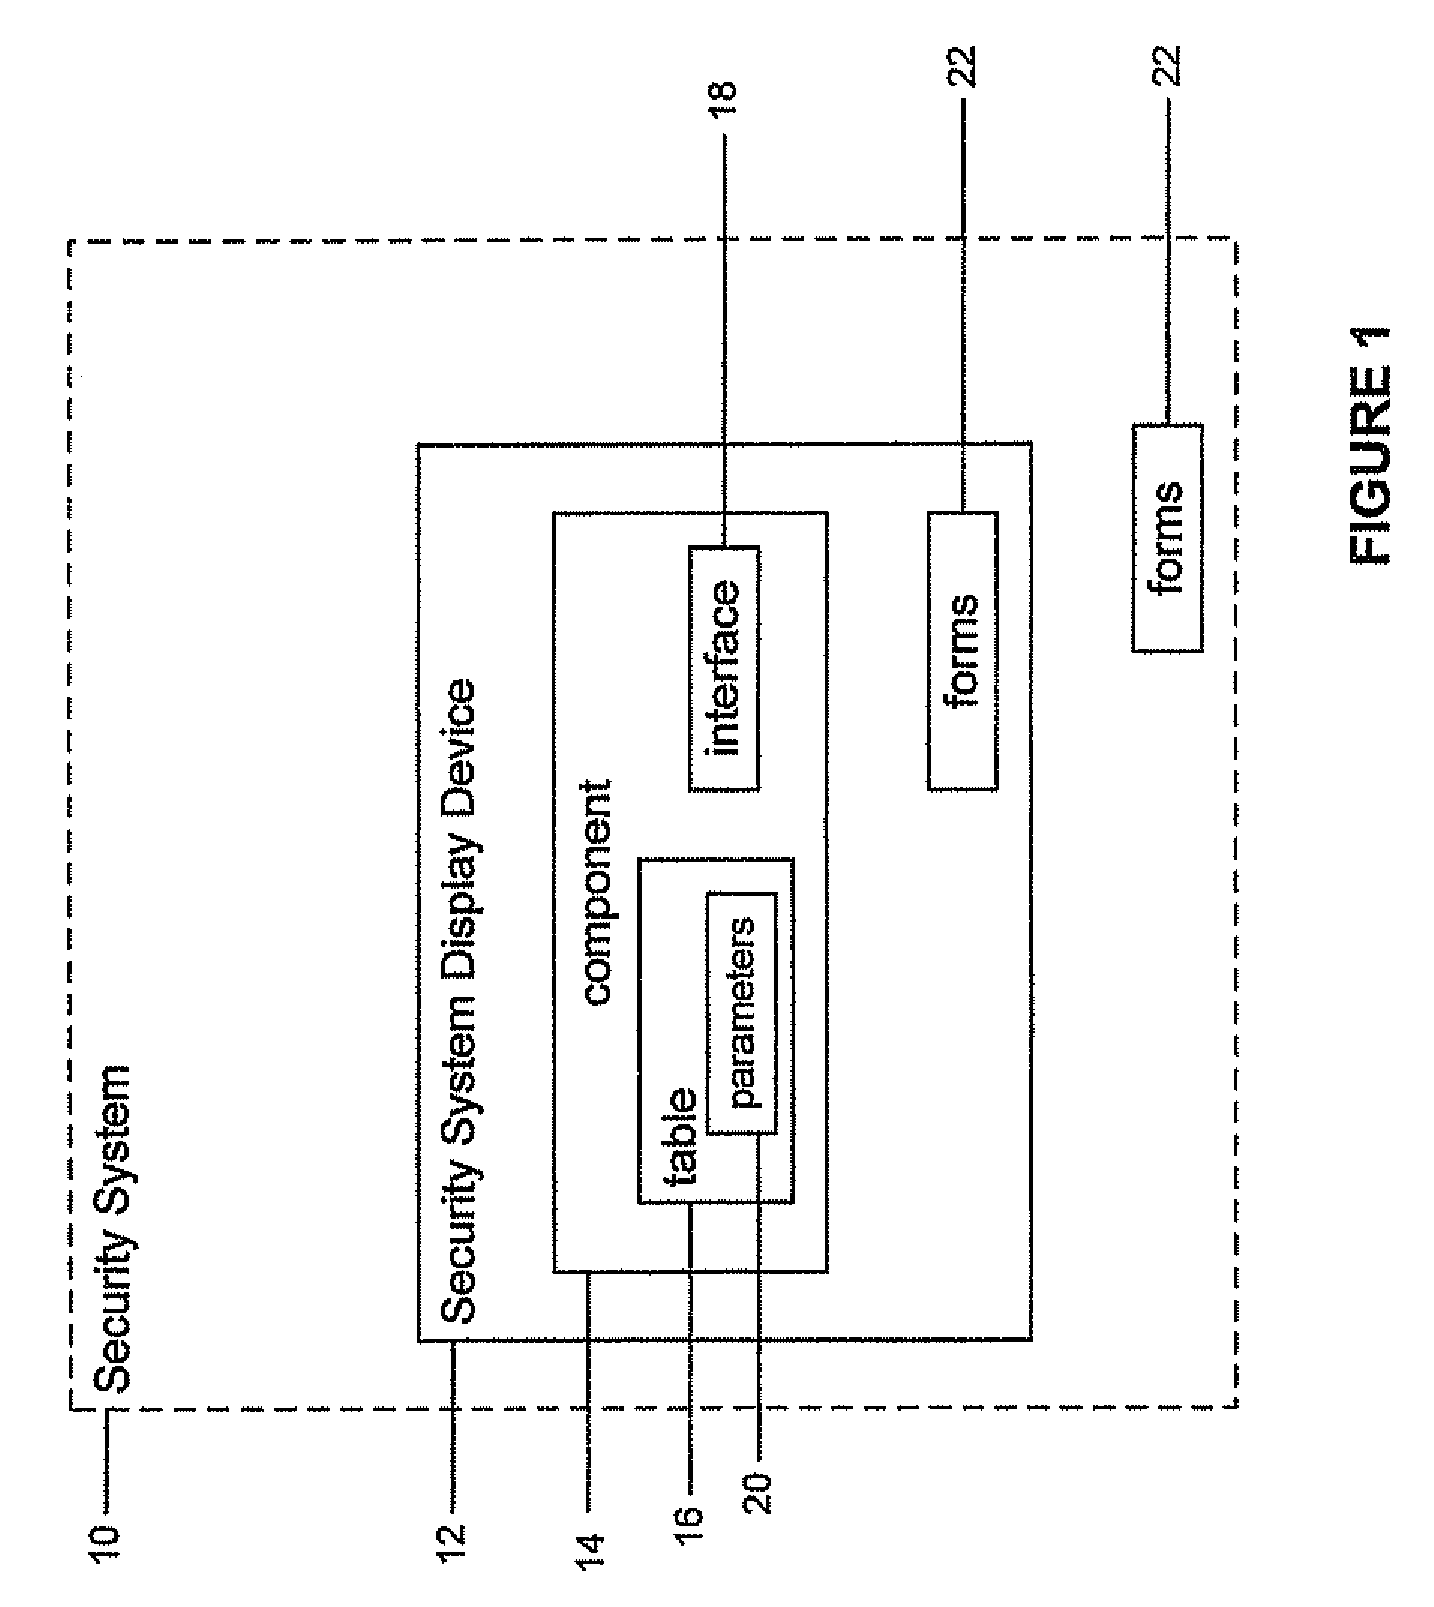 Device for coordinating displays on a security system